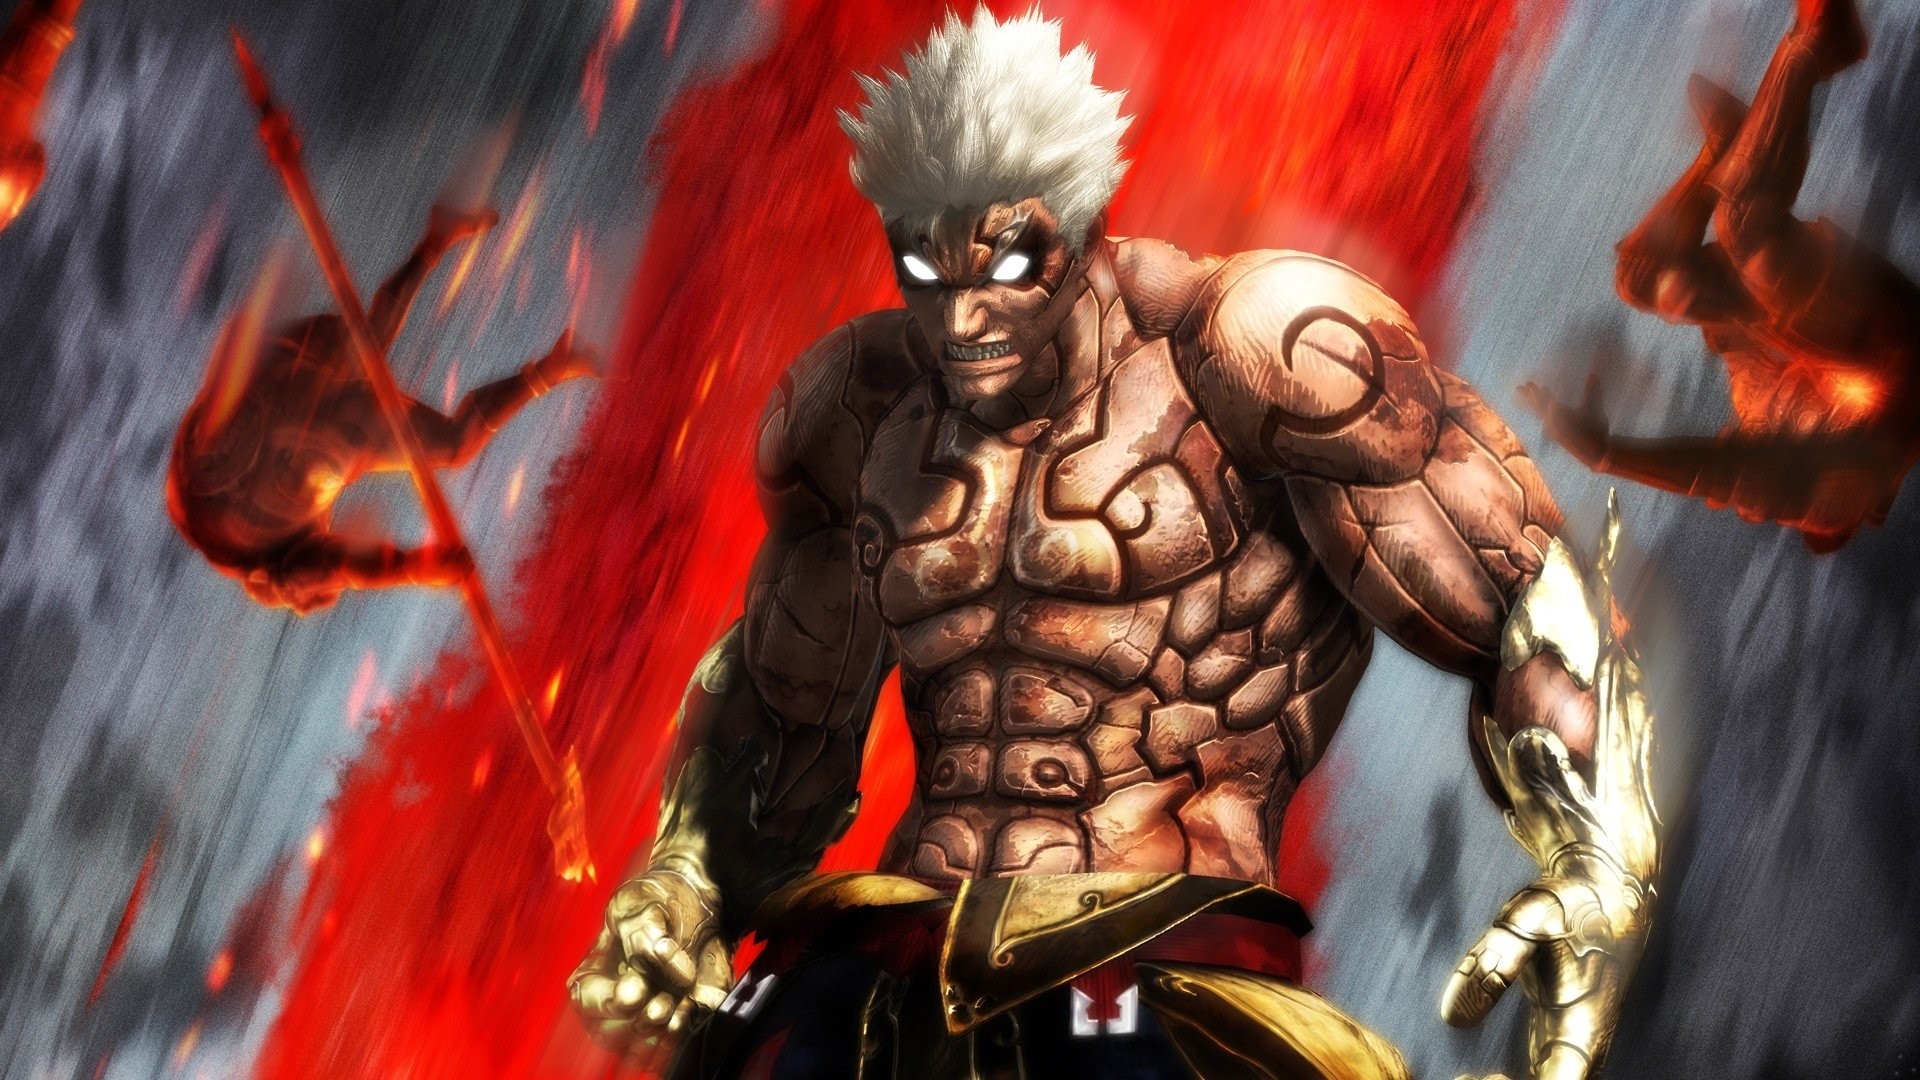 Asuras Wrath Wallpapers 92 Wallpapers  HD Wallpapers  Asuras wrath  Concept art characters Fantasy character design